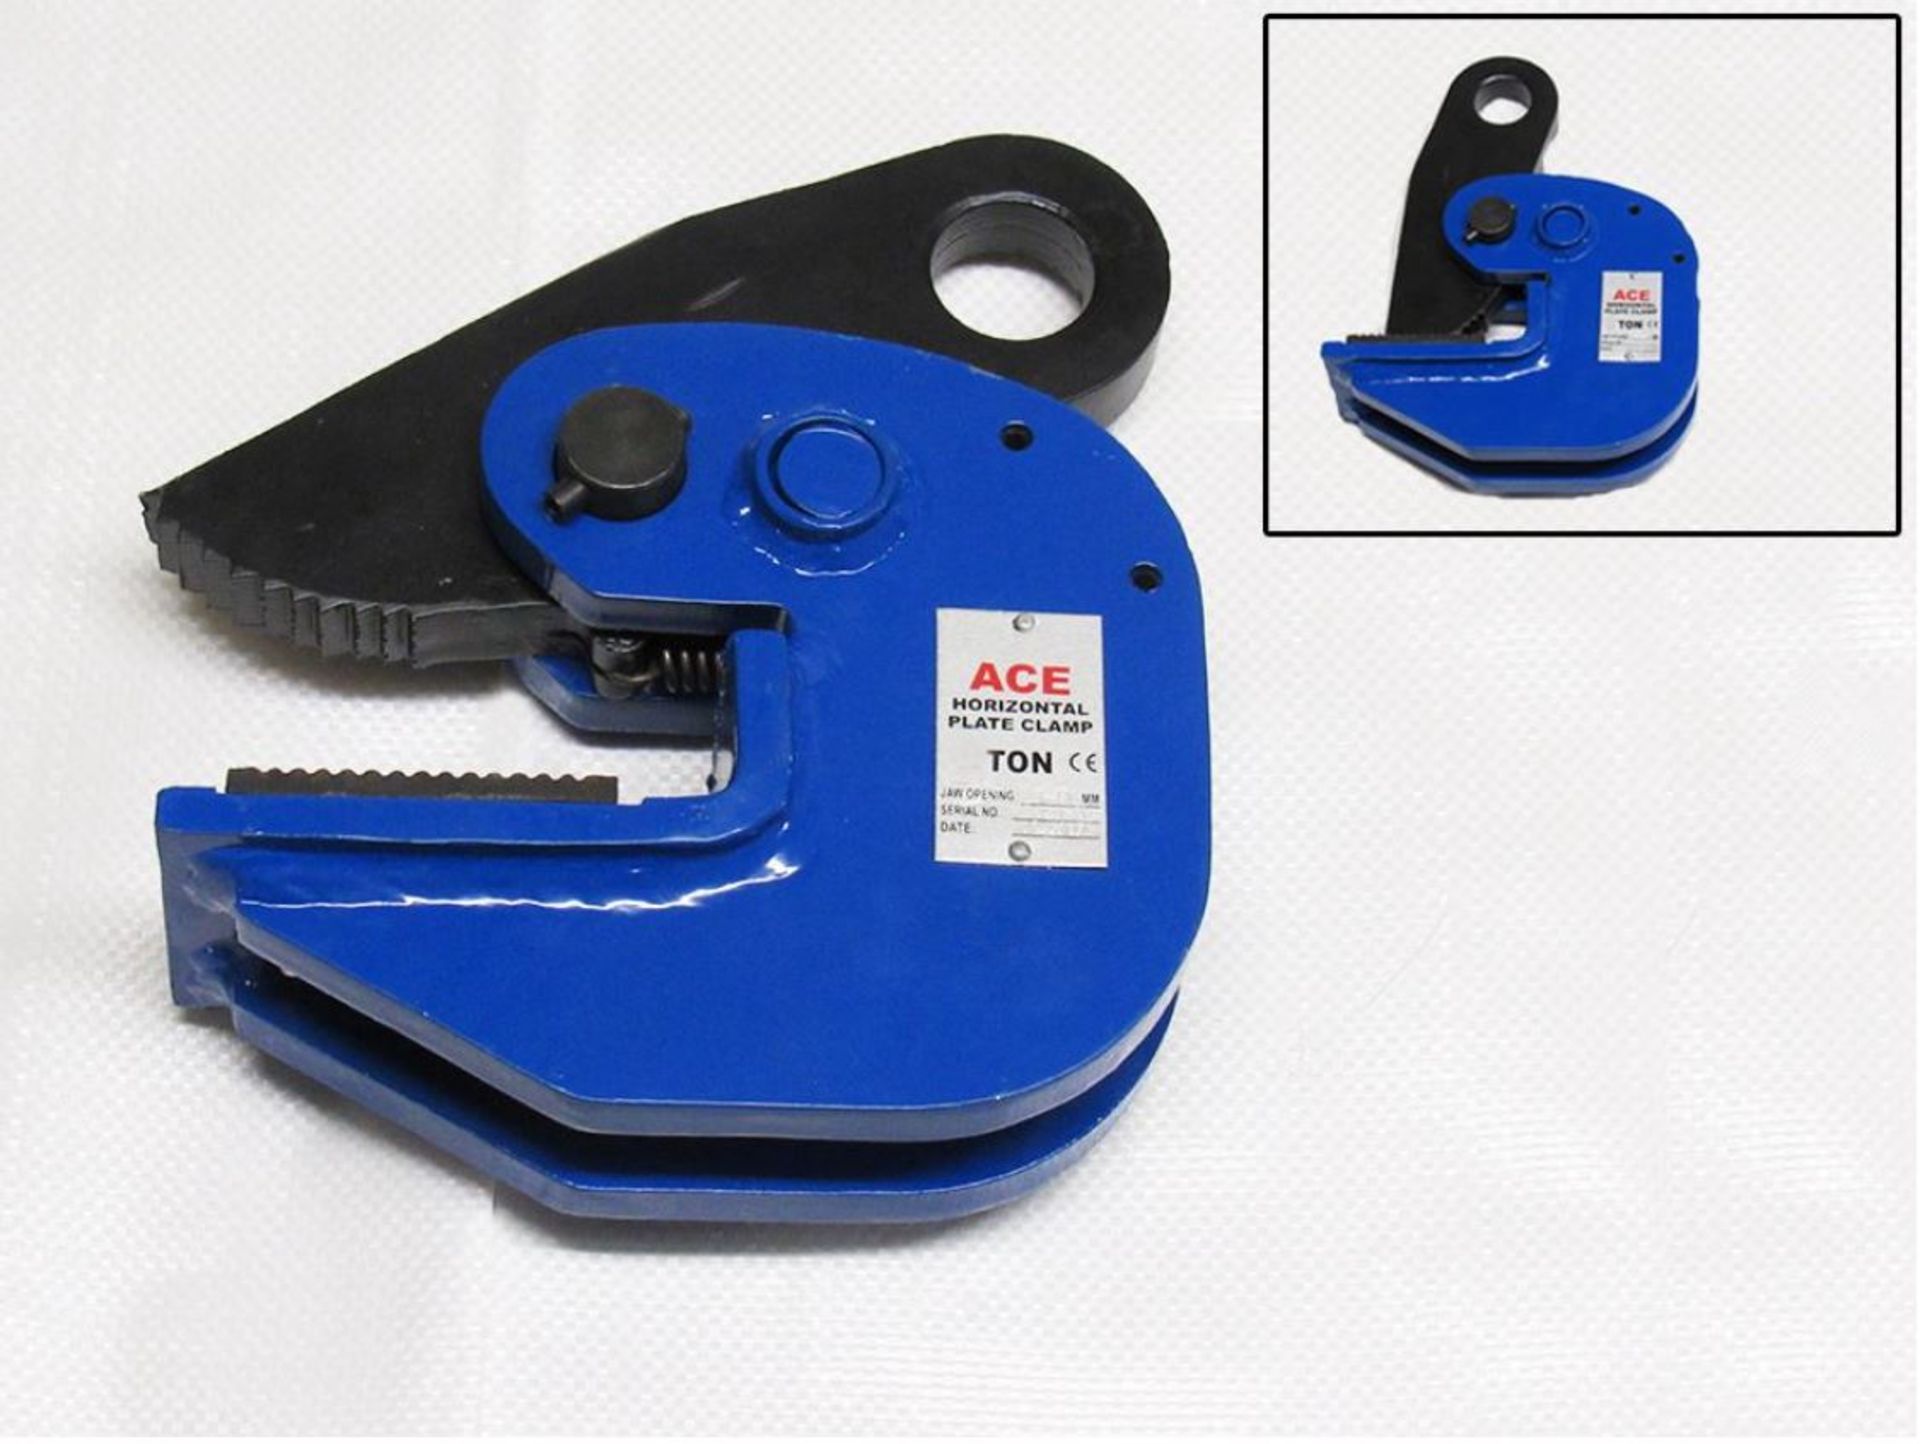 1 pair x 1 ton horizontal plate lifting clamp 0-30mm swl is when used as a pair (hlc1)